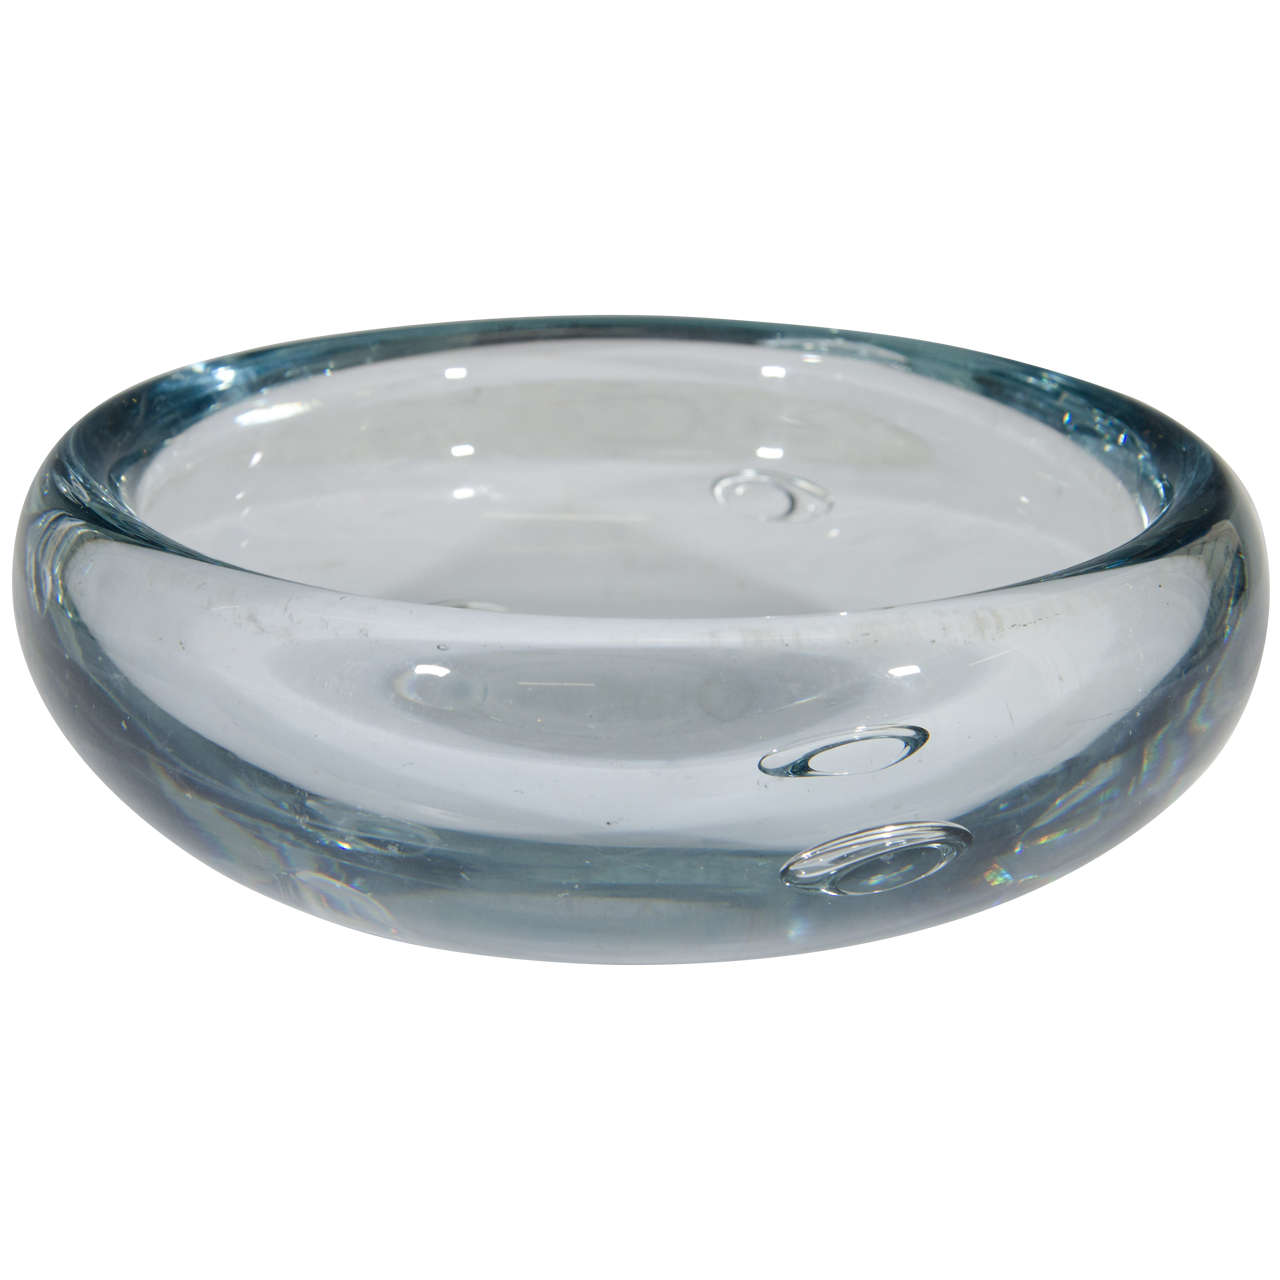 A Midcentury Swedish Art Glass Dish or Bowl For Sale